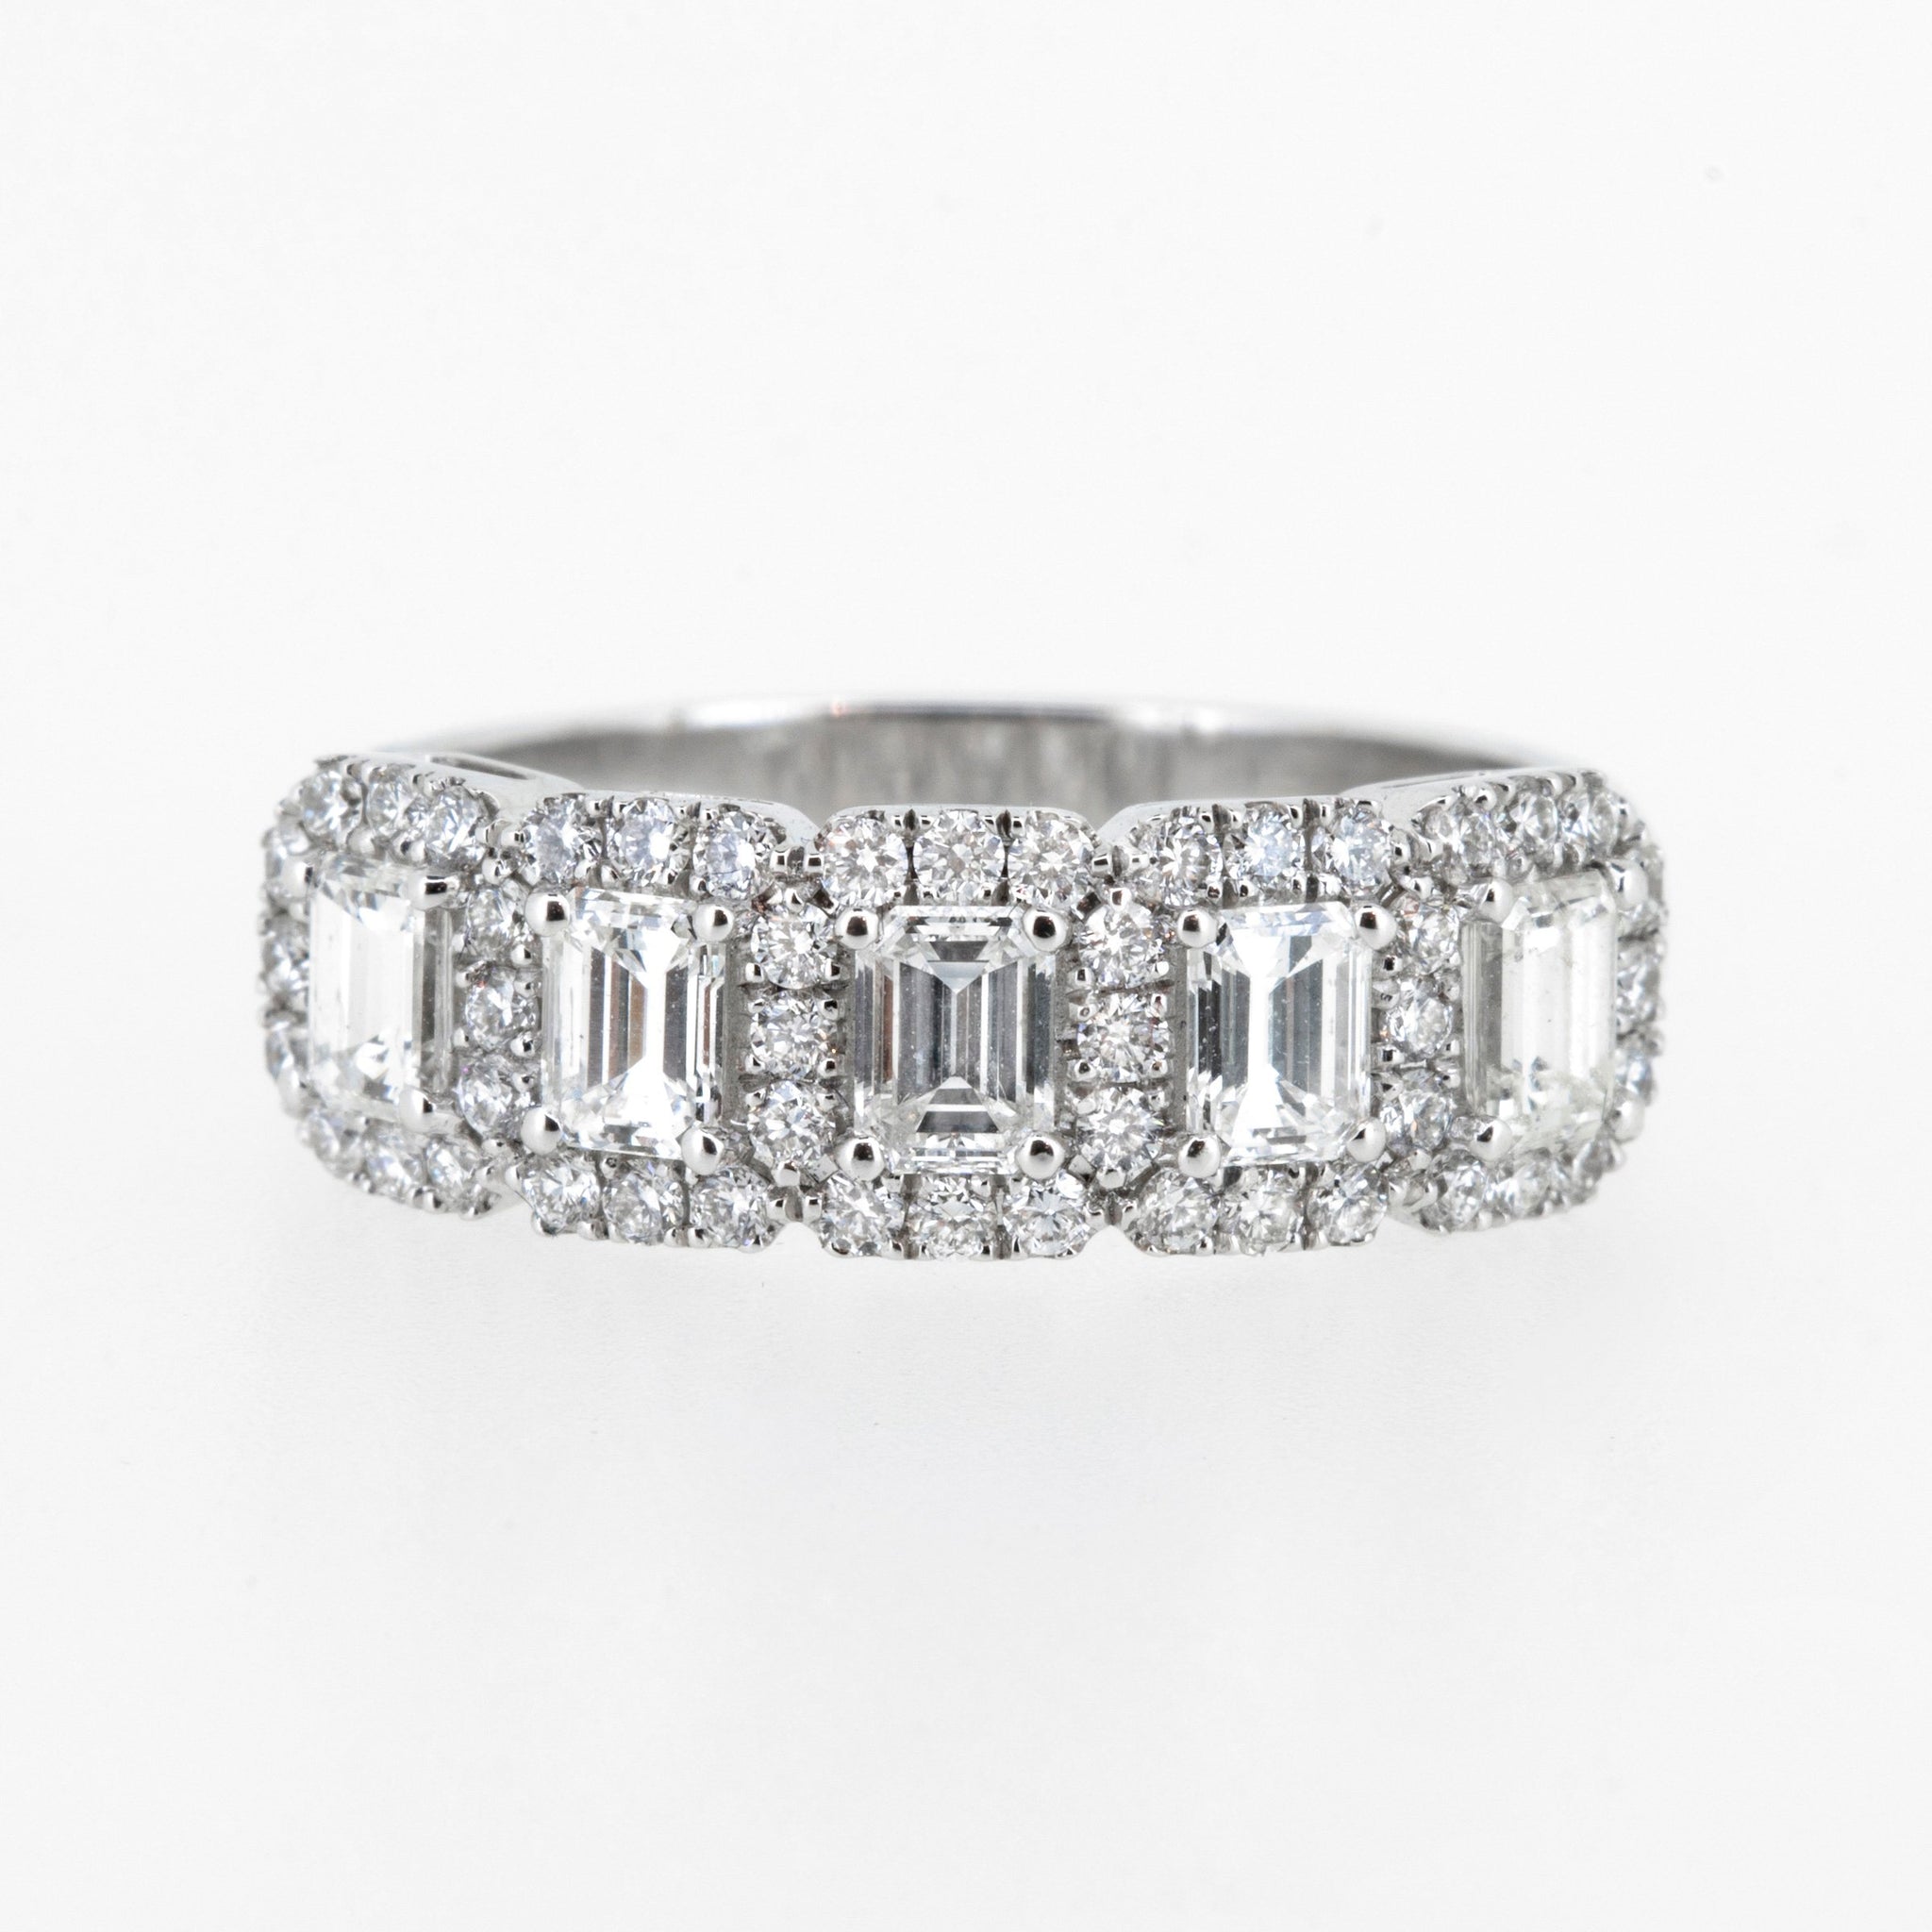 Eternity and wedding rings for the discerning